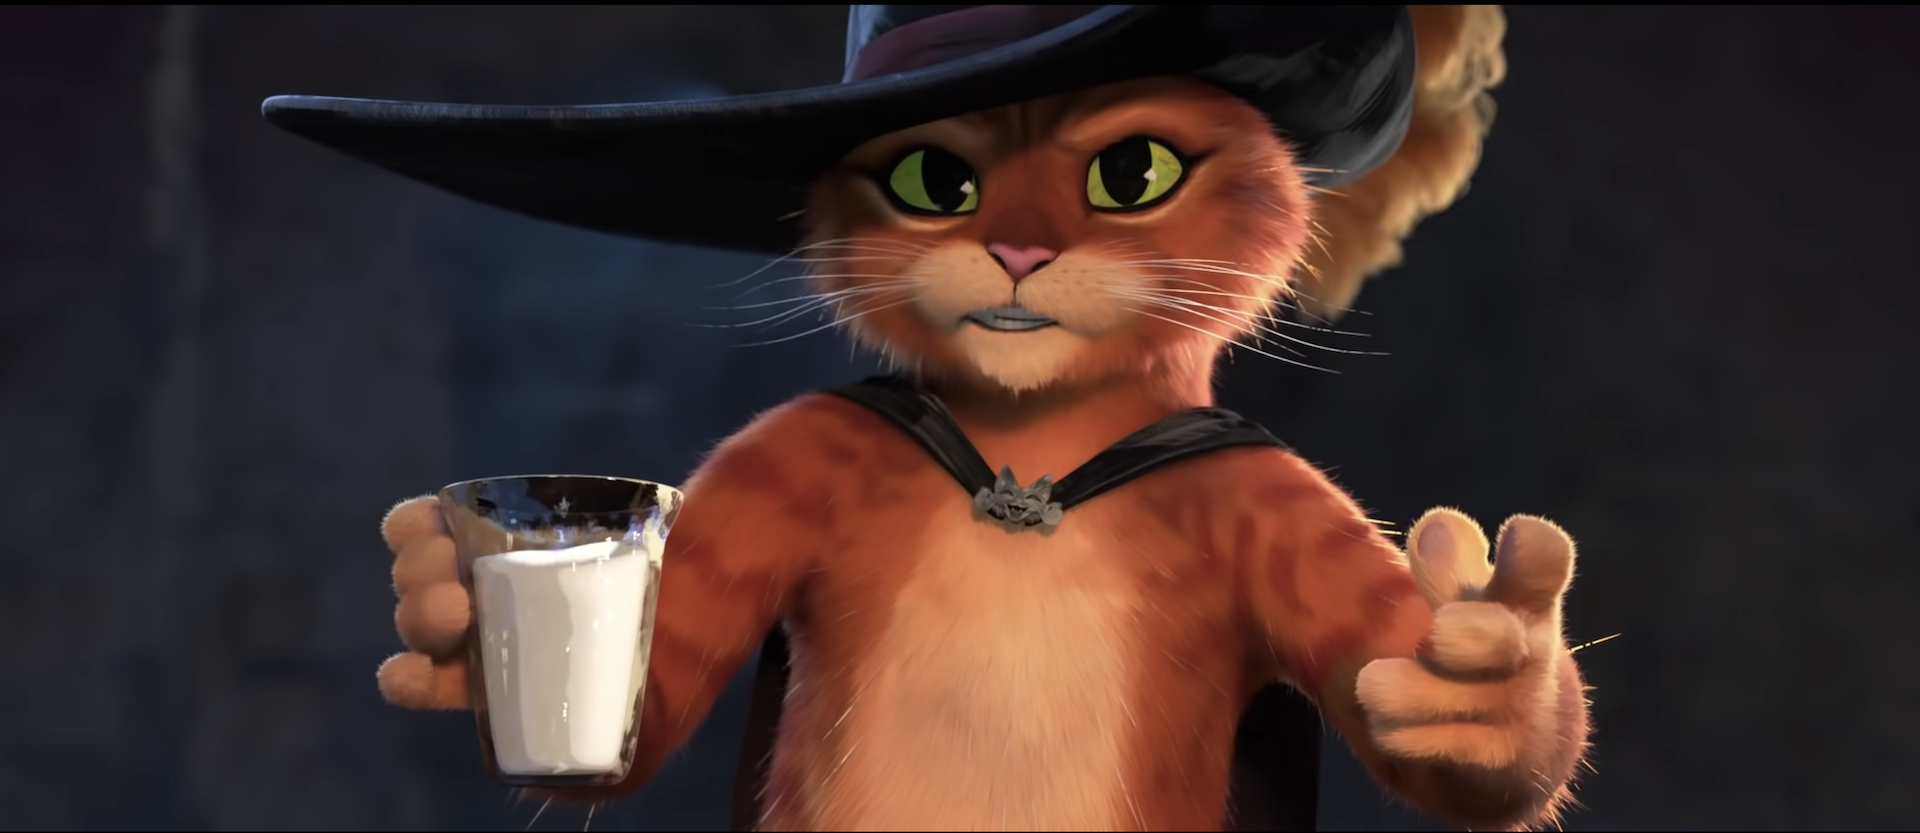 The cat is officially out of the bag. The long-awaited sequel to 2011's Puss In Boots is on the way. Puss In Boots: The Last Wish unveiled its first trailer on March 15.